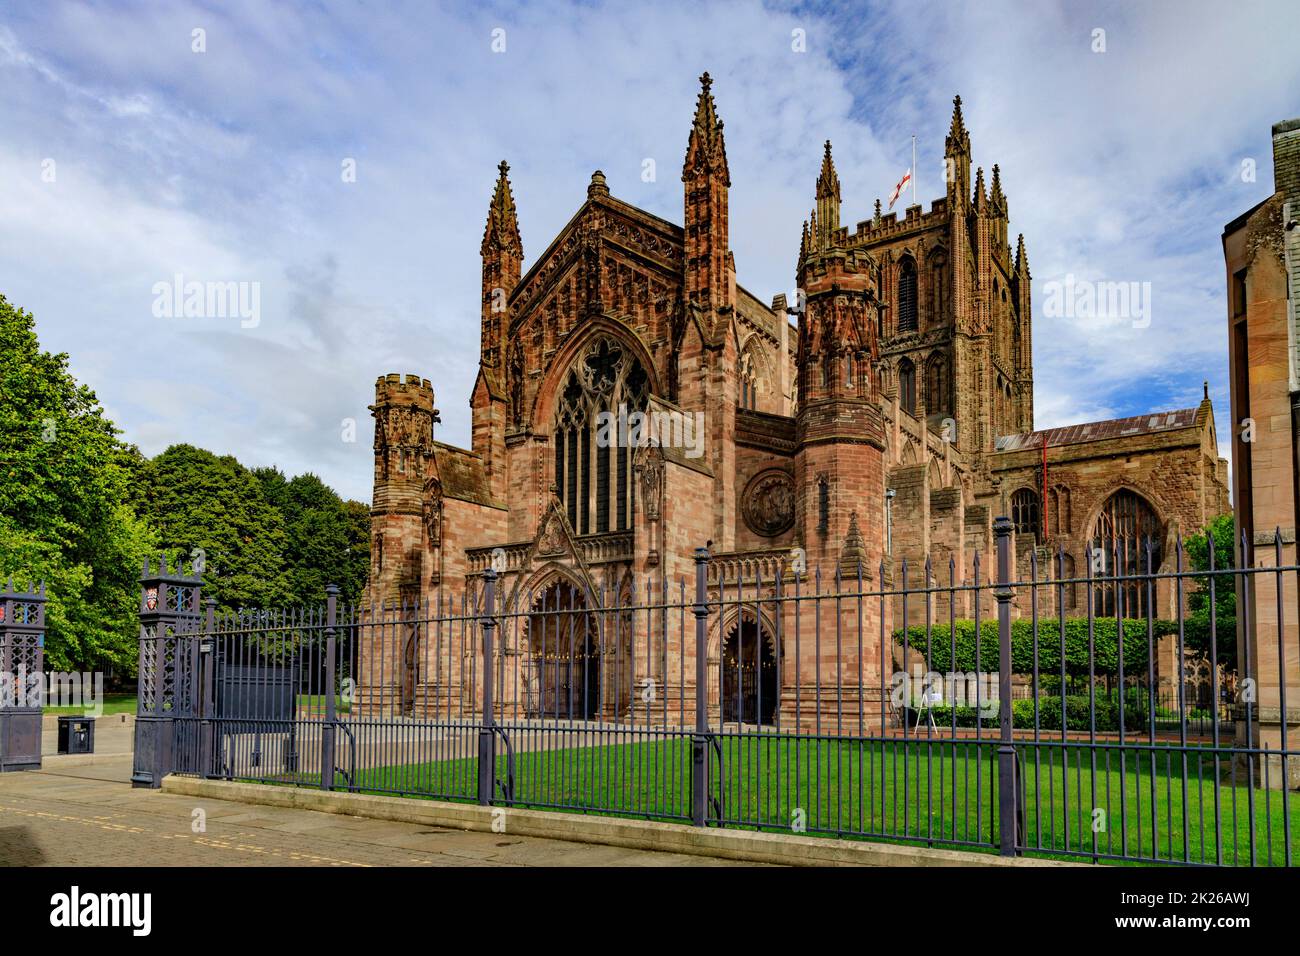 West front of the Gothic Cathedral of St Mary the Virgin and St Ethelbert the King in Hereford, Herefordshire, England, UK Stock Photo